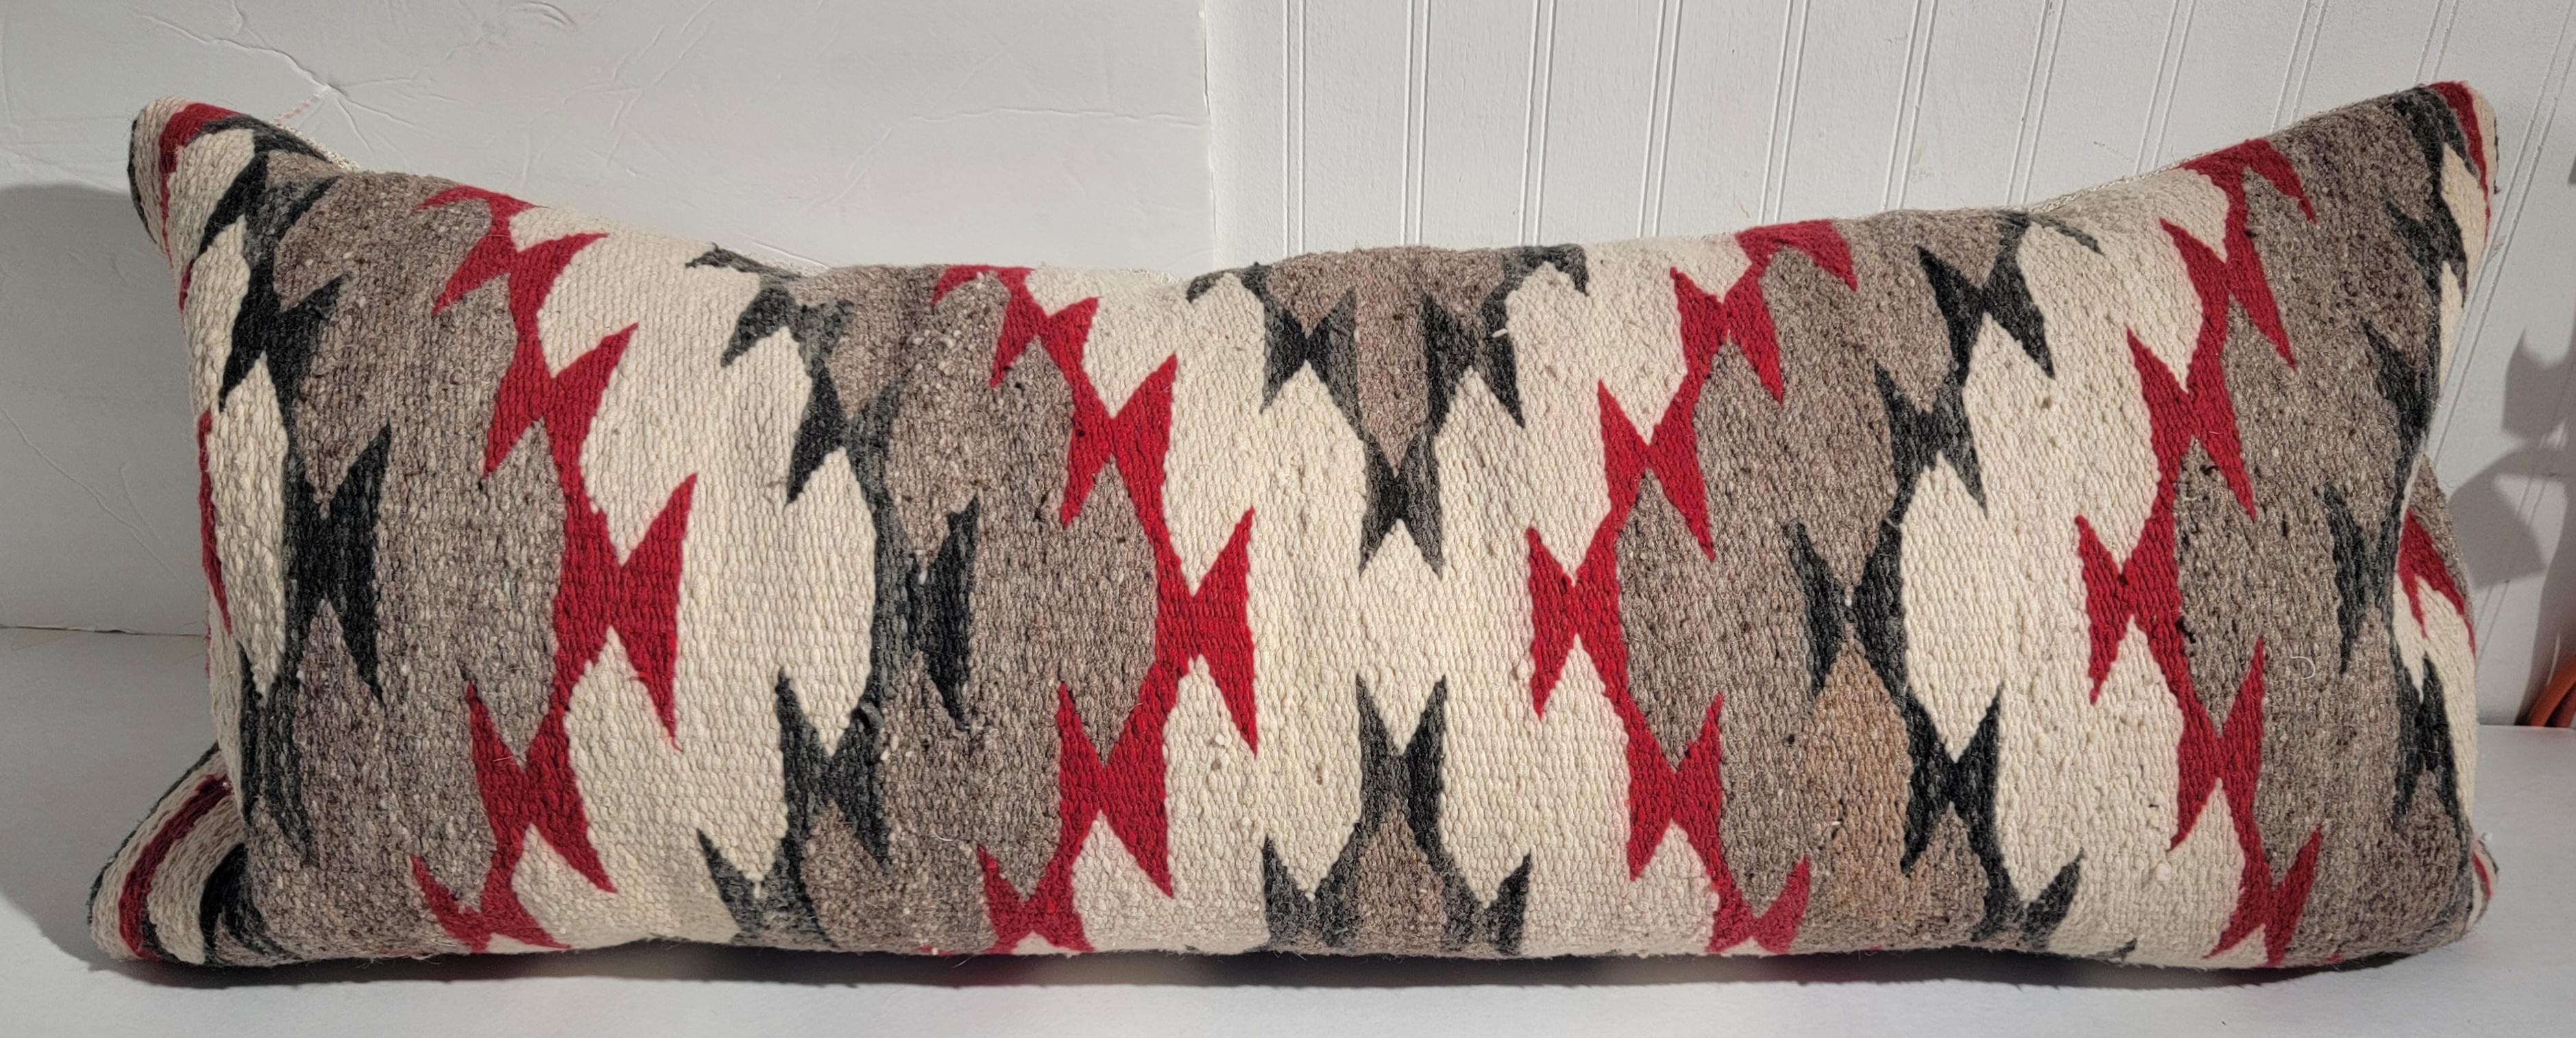 Adirondack Collection of Four Navajo Weaving Bolster Pillows -4  For Sale